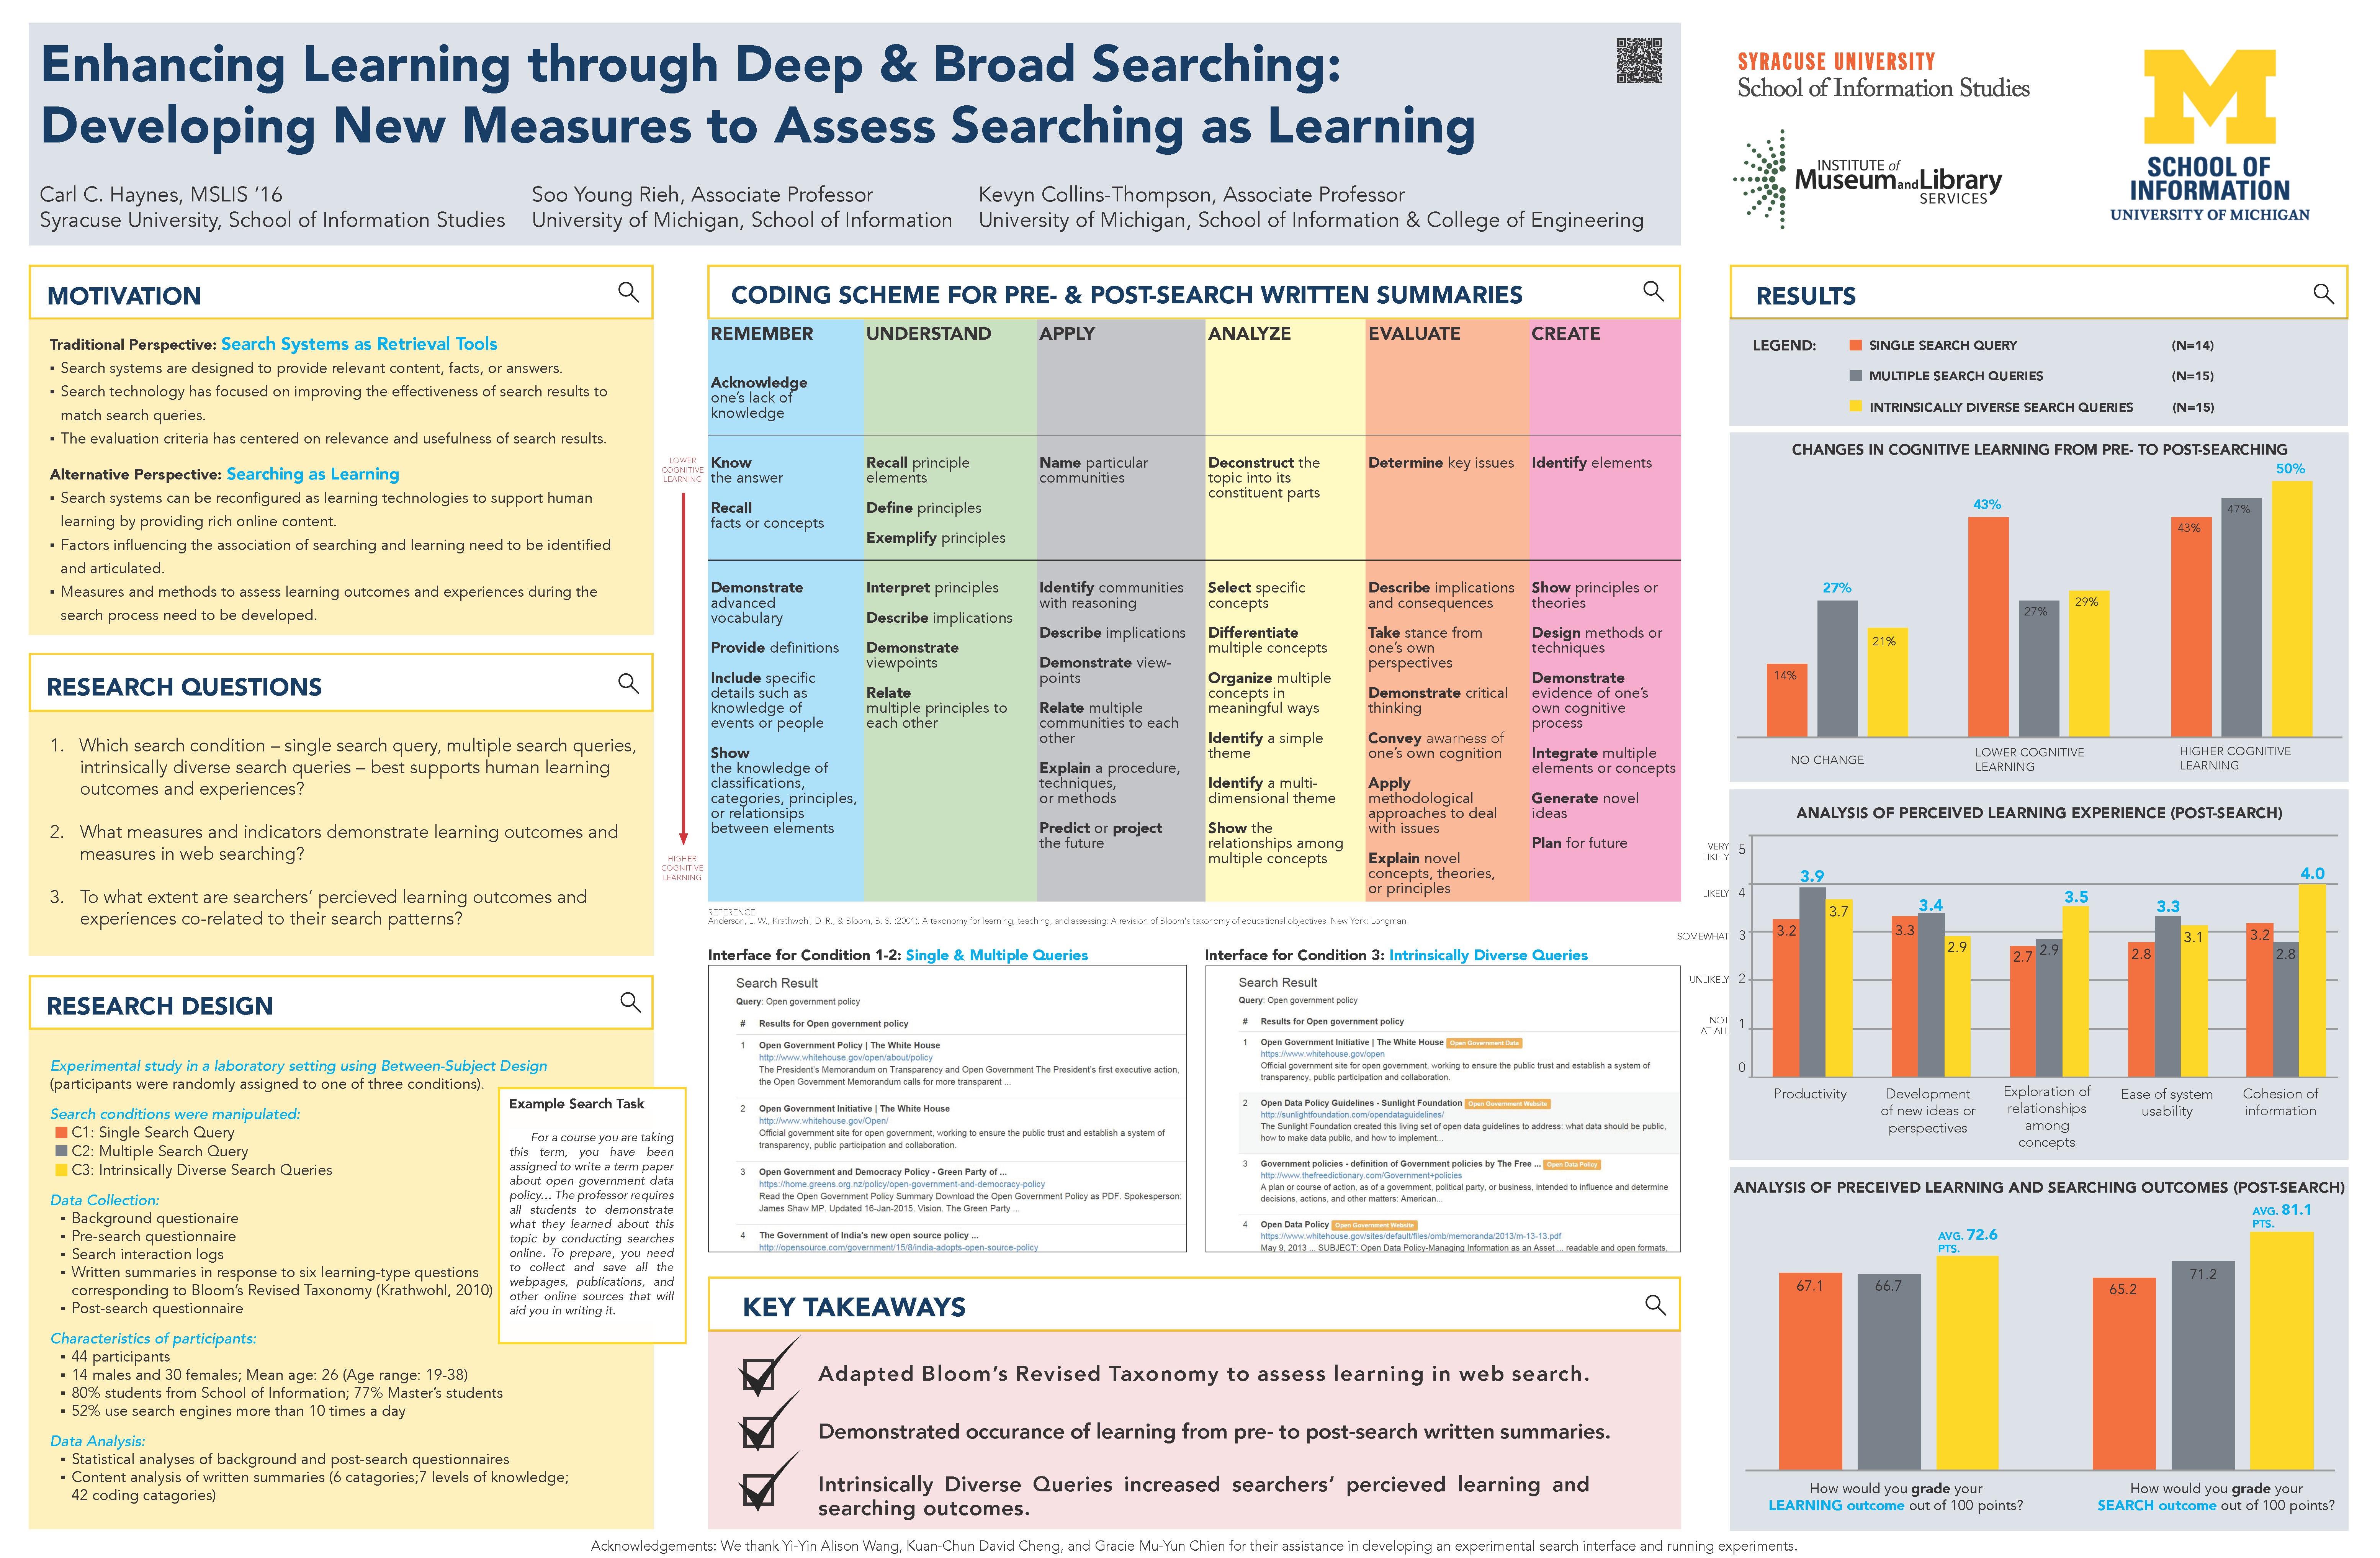 2016 Conference on Human Information Interaction and Retrieval poster